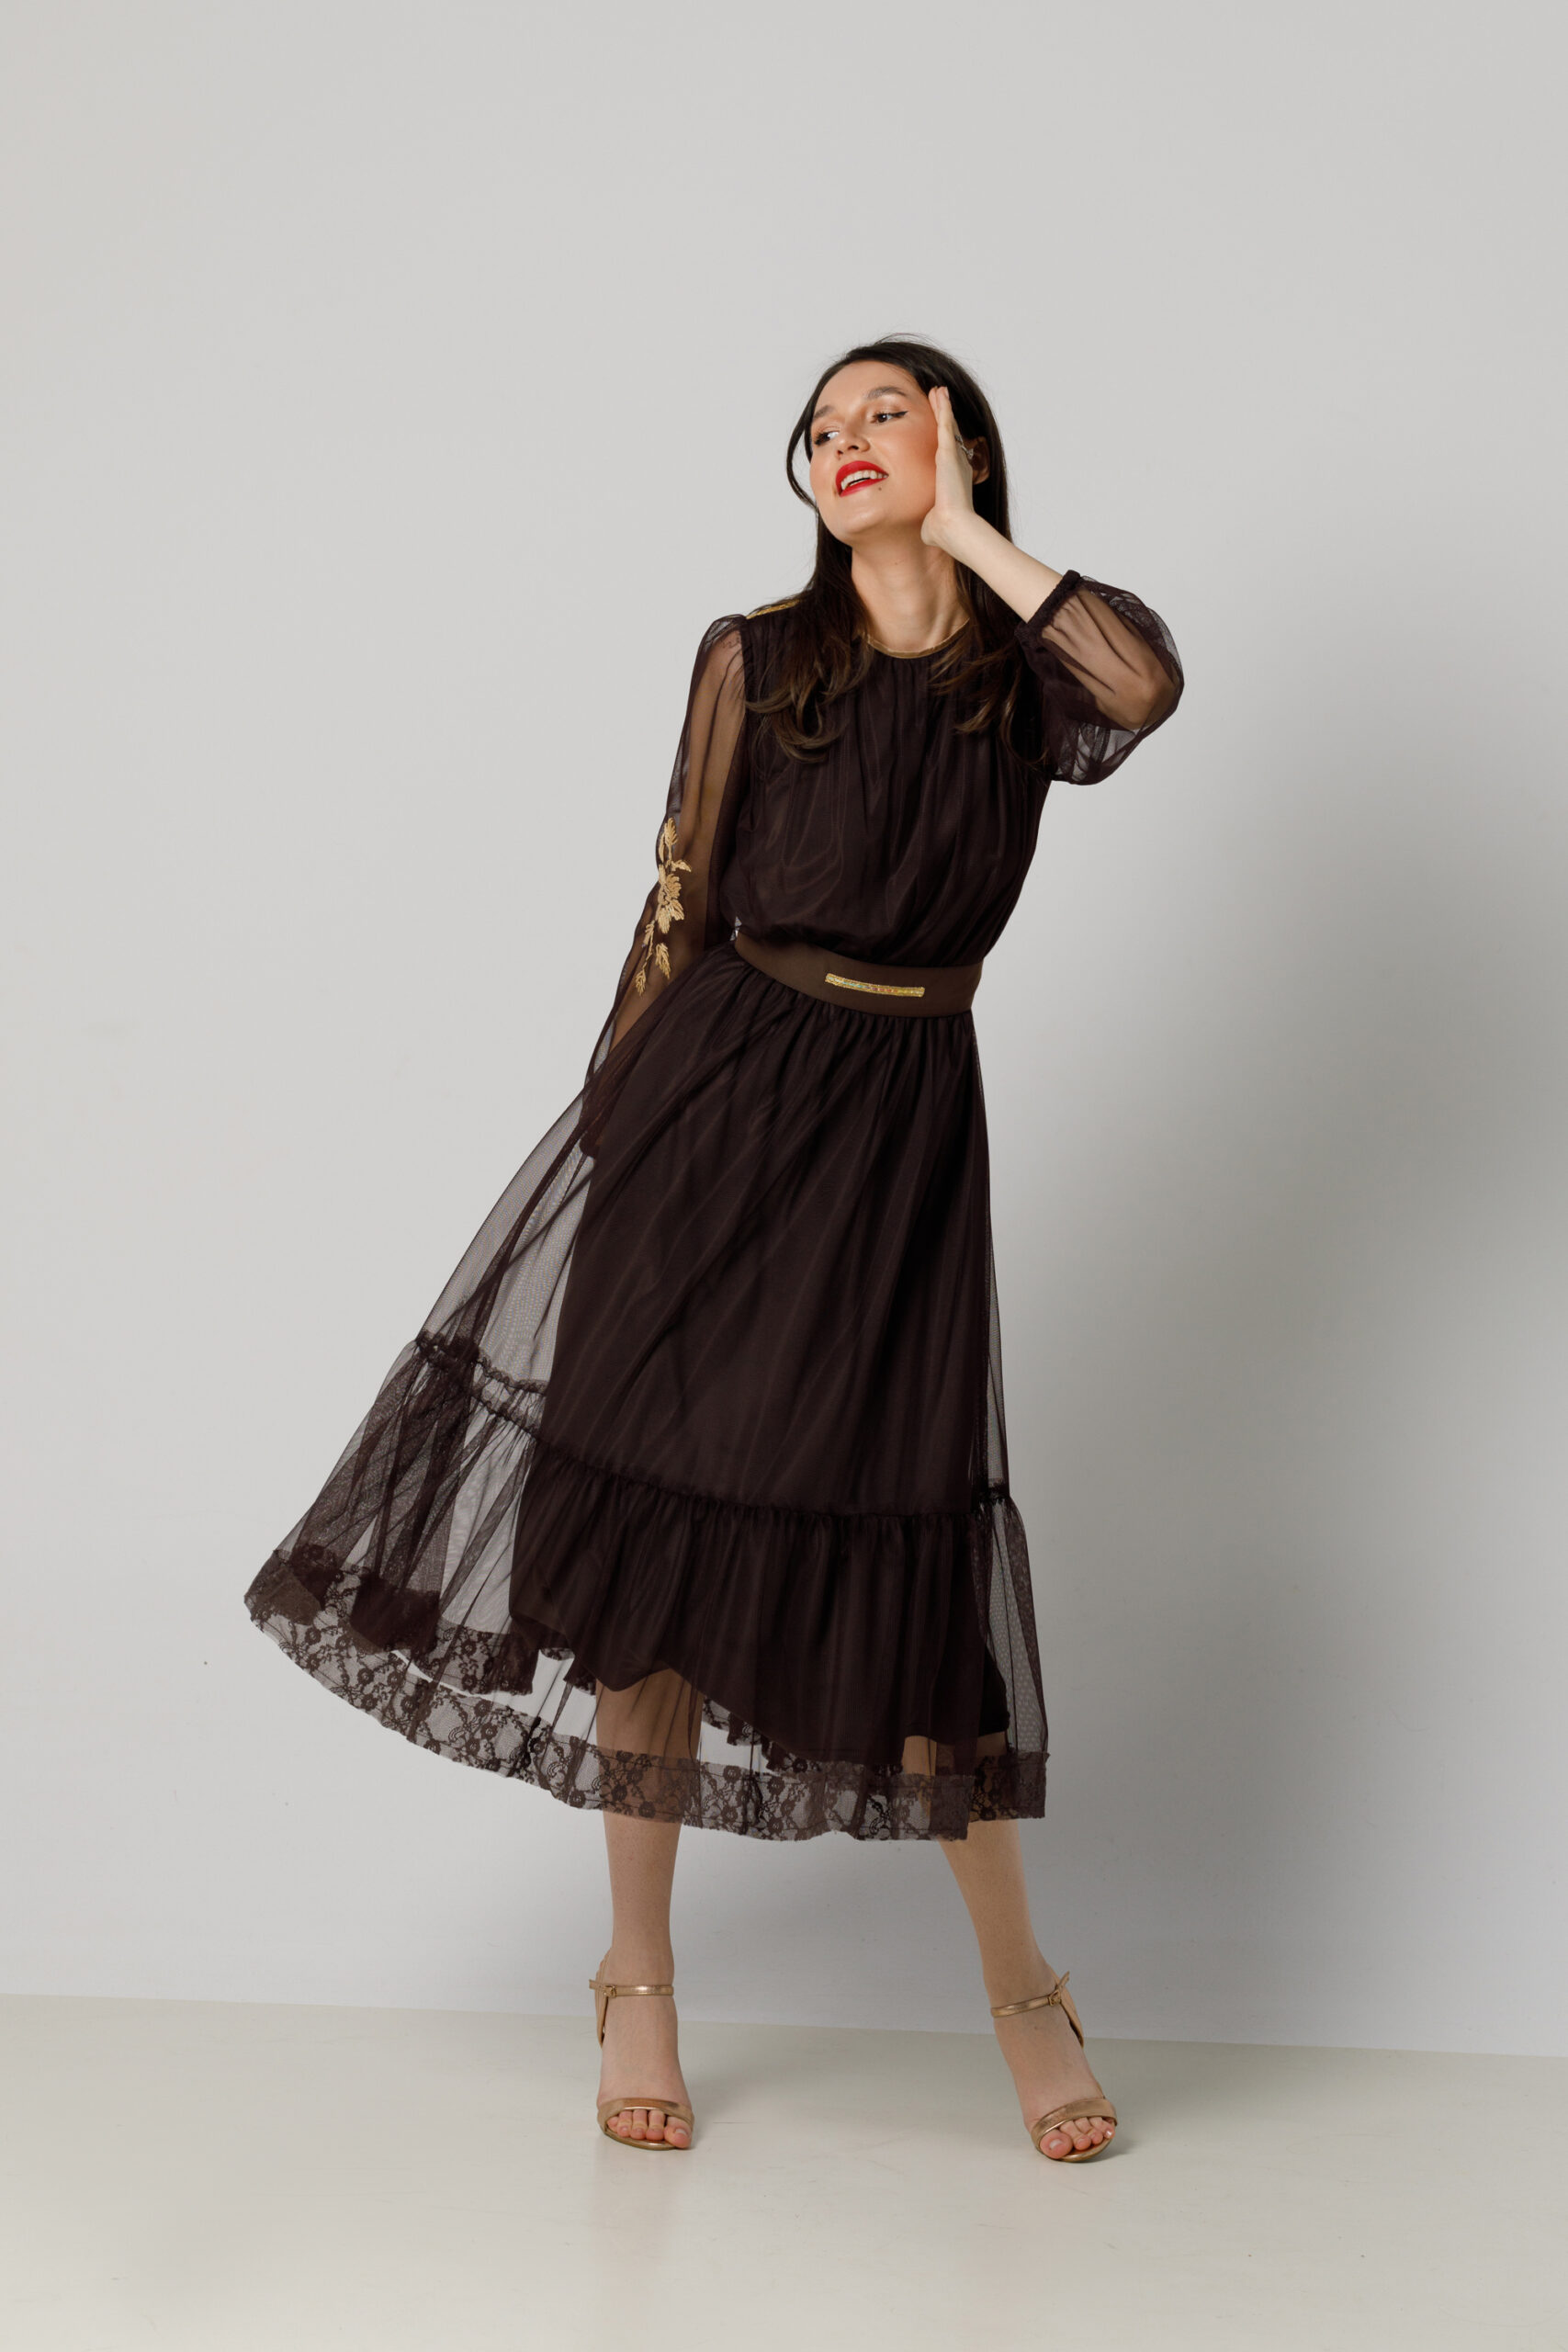 AMARIS brown SHORT elegant dress made of tulle and lace. Natural fabrics, original design, handmade embroidery